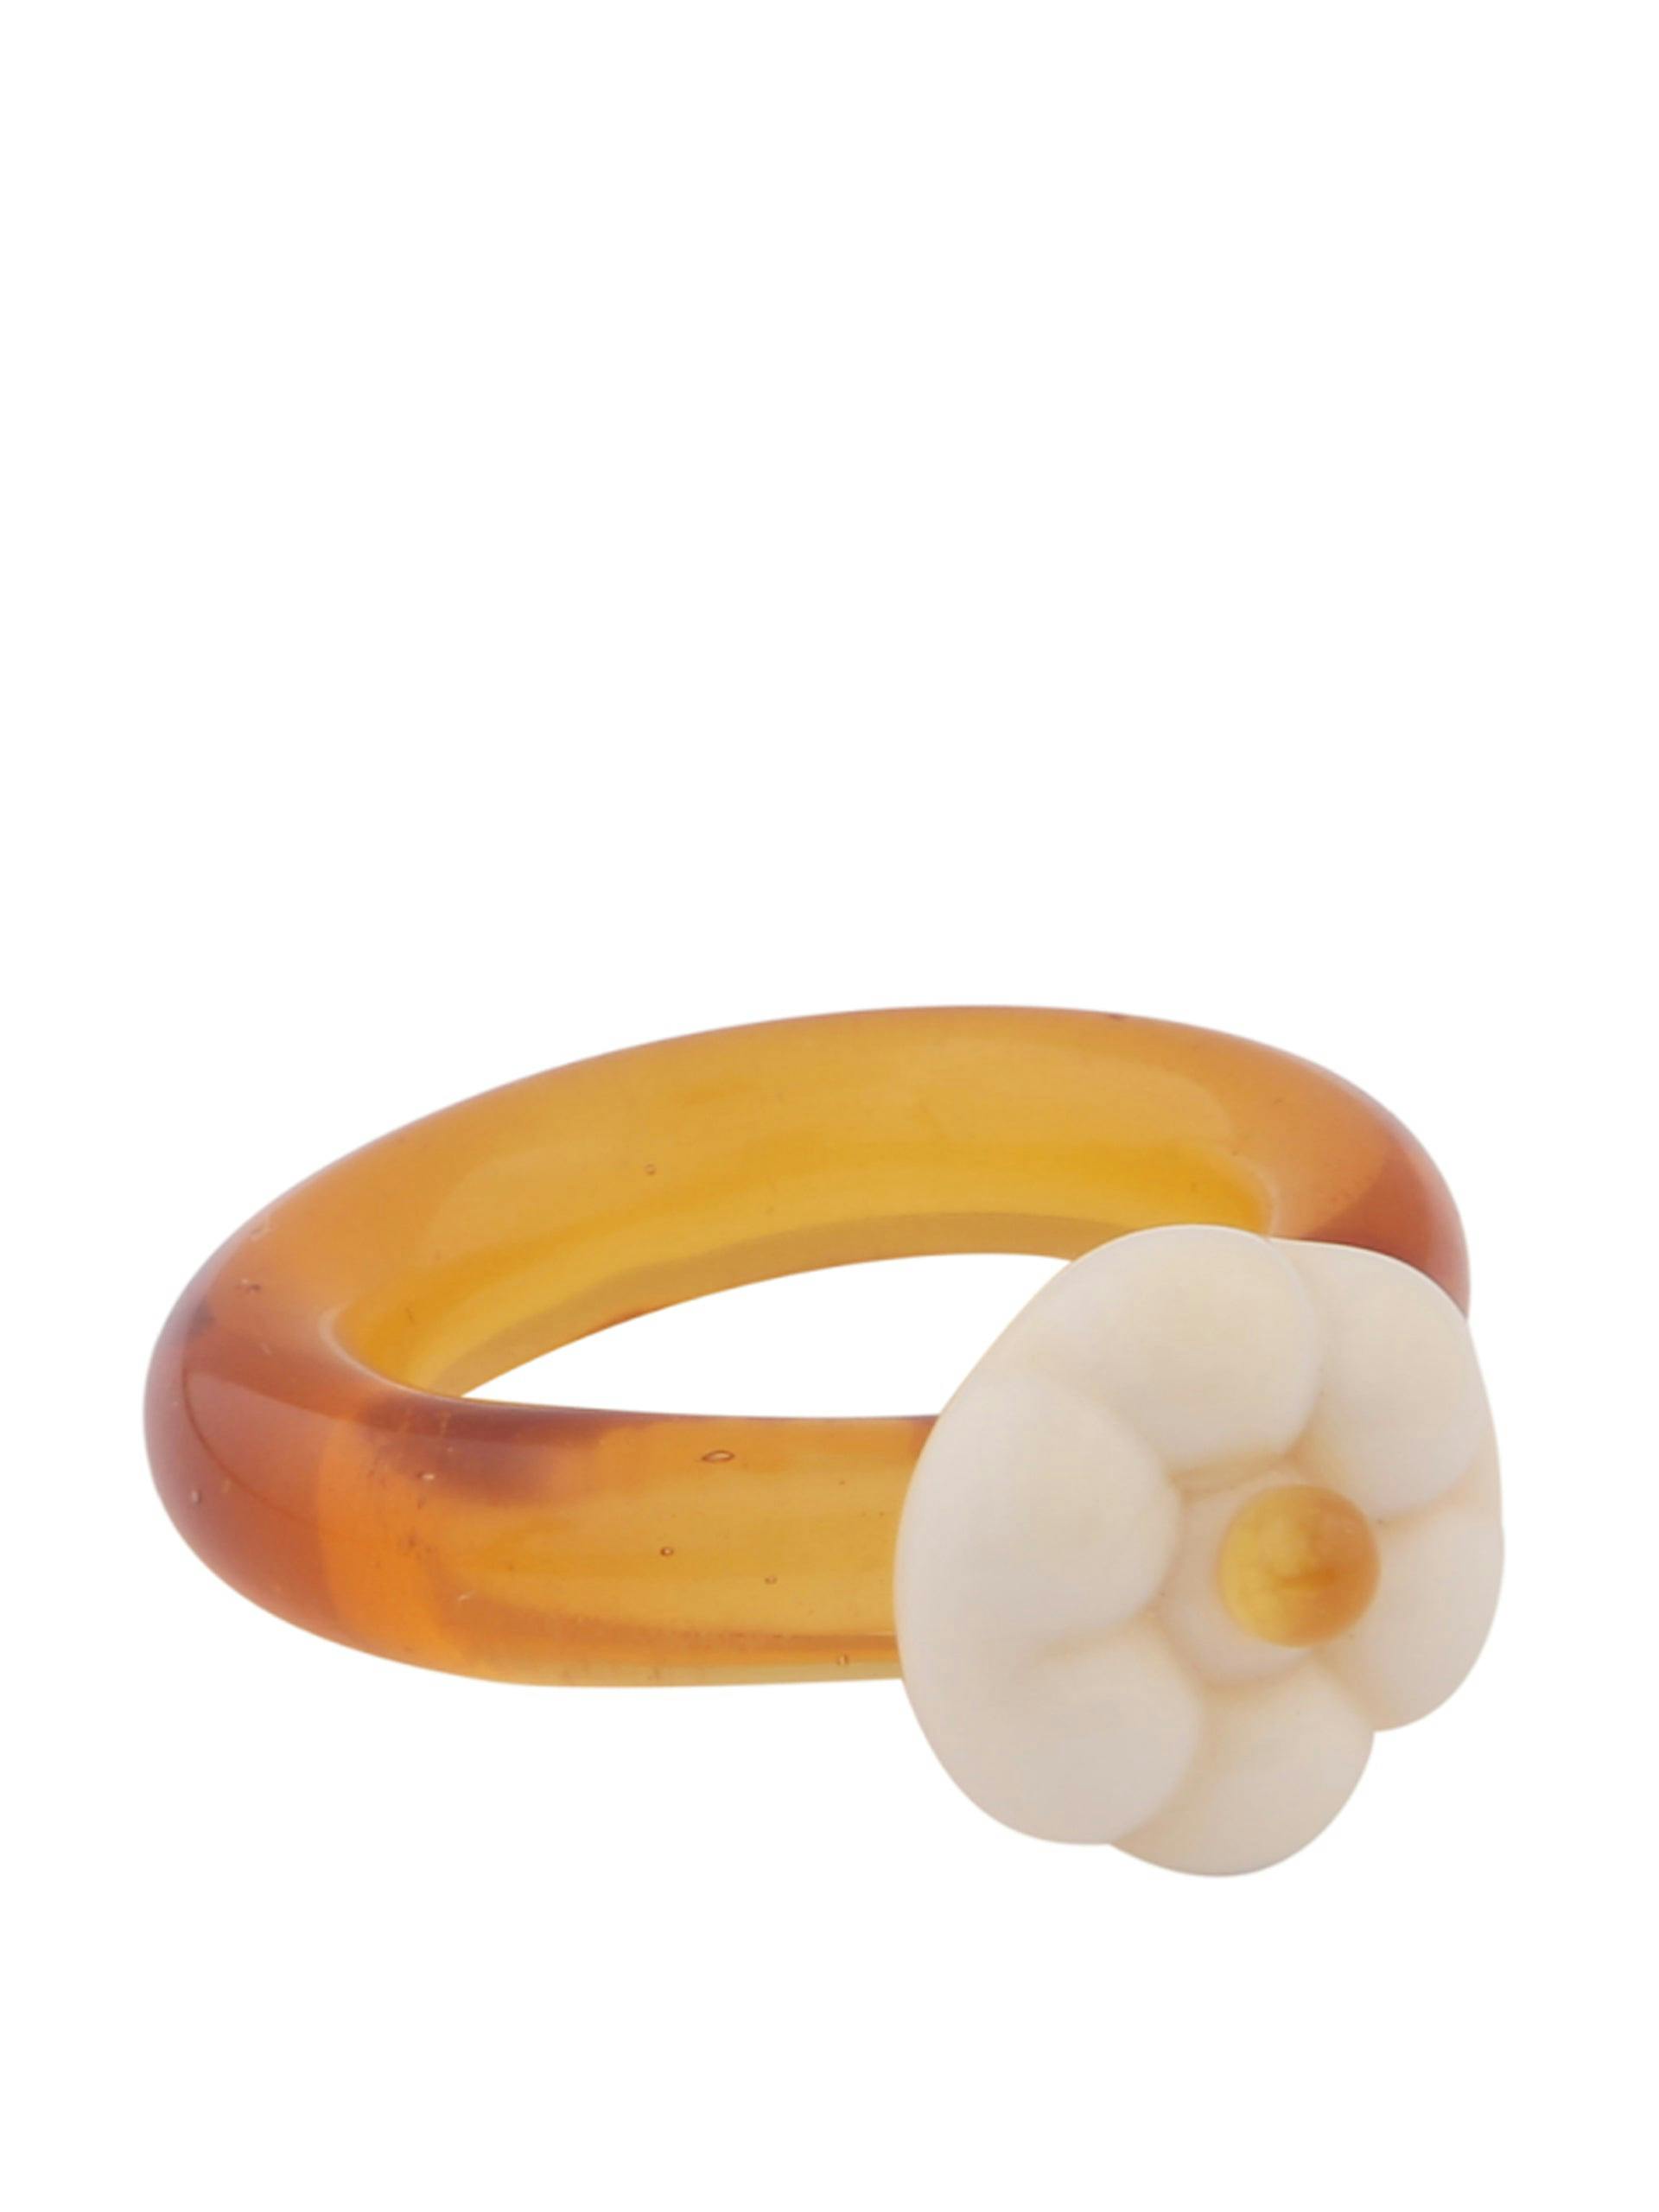 Daisy ring in amber and ivory